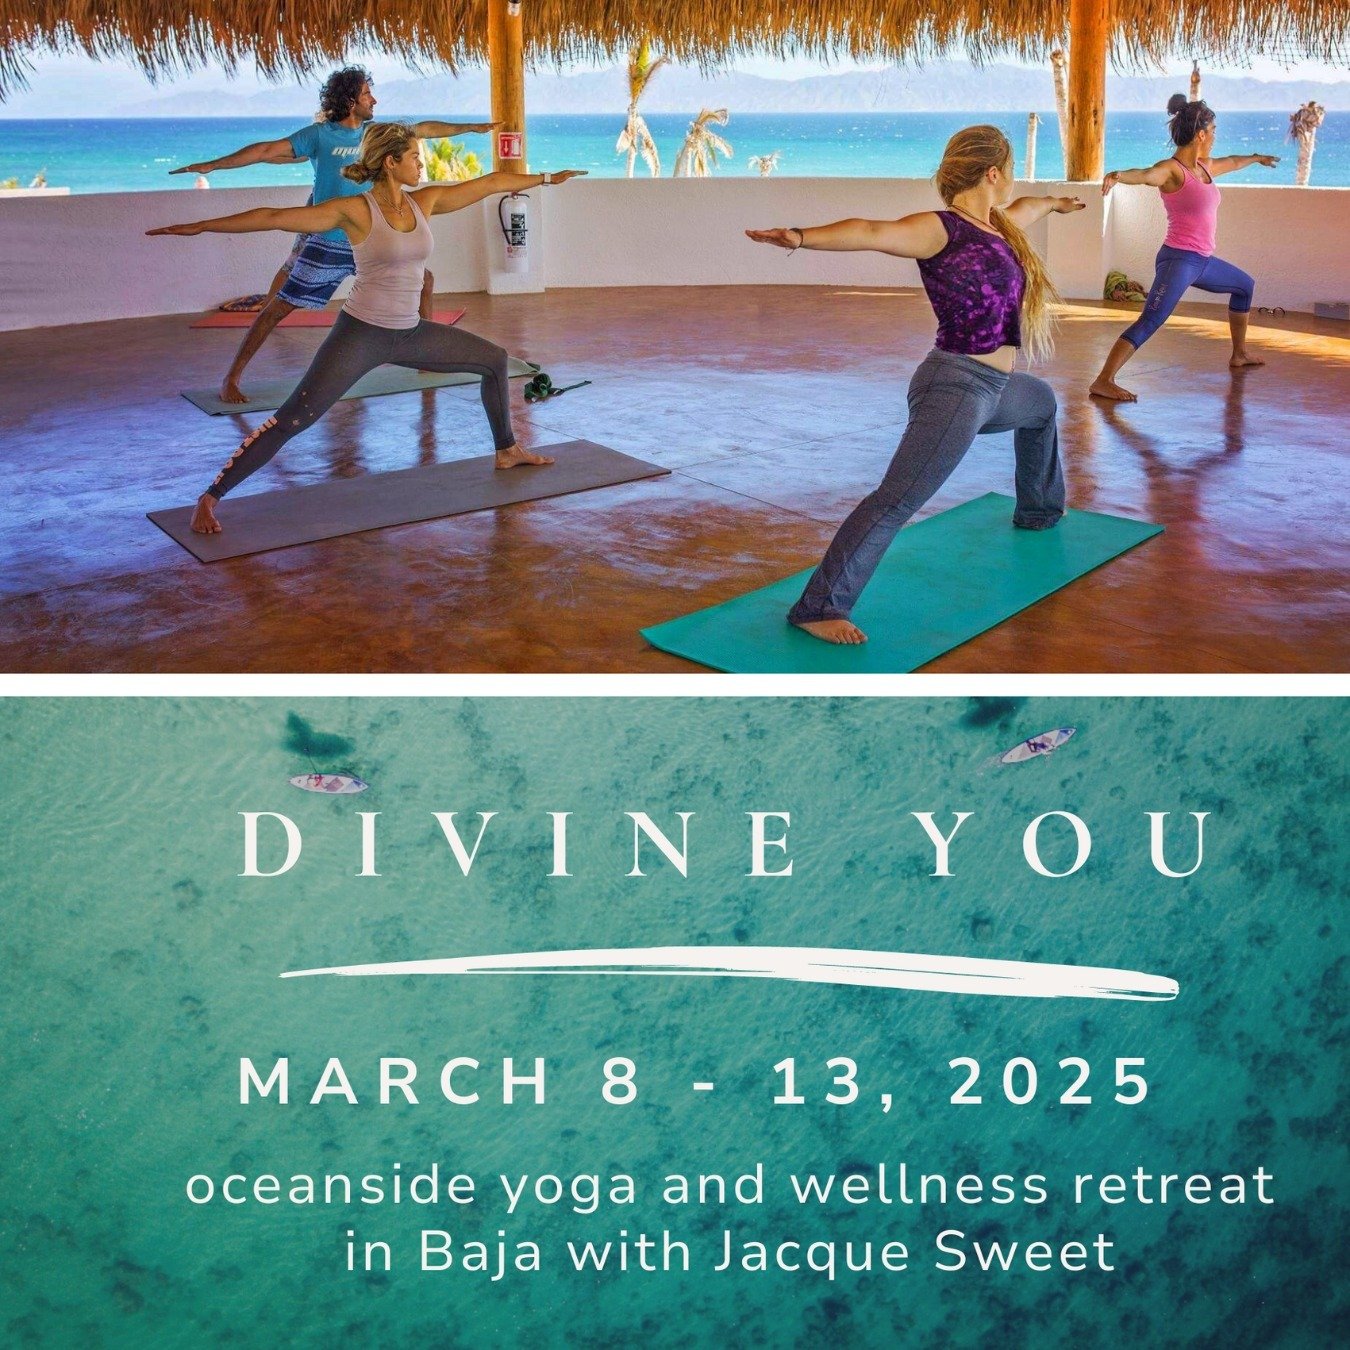 🚨NEW RETREAT ON THE BOOKS! 🚨 And it&rsquo;s booking up fast&hellip;⁠
⁠
Next March, join Jacque Sweet where the desert meets the sea in Baja, Mexico for a 6-day / 5-night immersive journey into the heart of yoga, breathwork, and meditation, designed